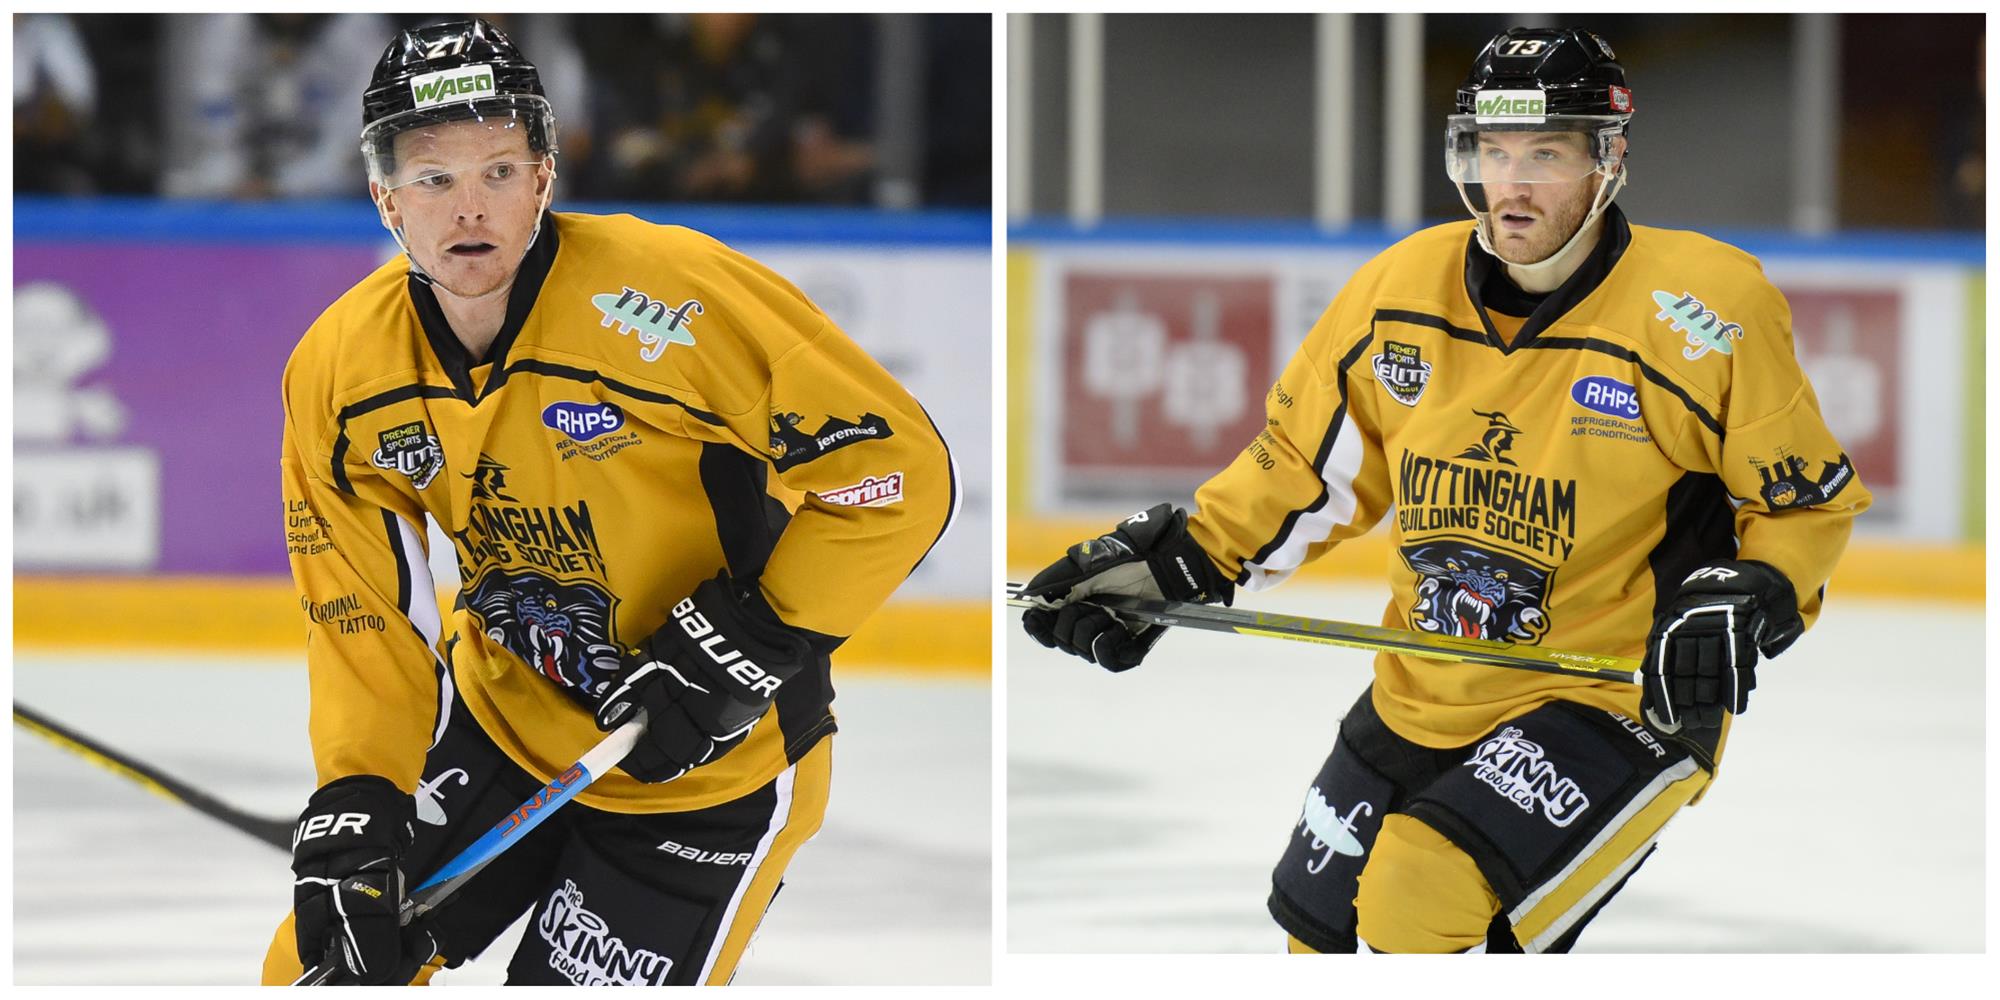 SUMMERS AND SORENSON ON THE RADIO TONIGHT - Nottingham Panthers